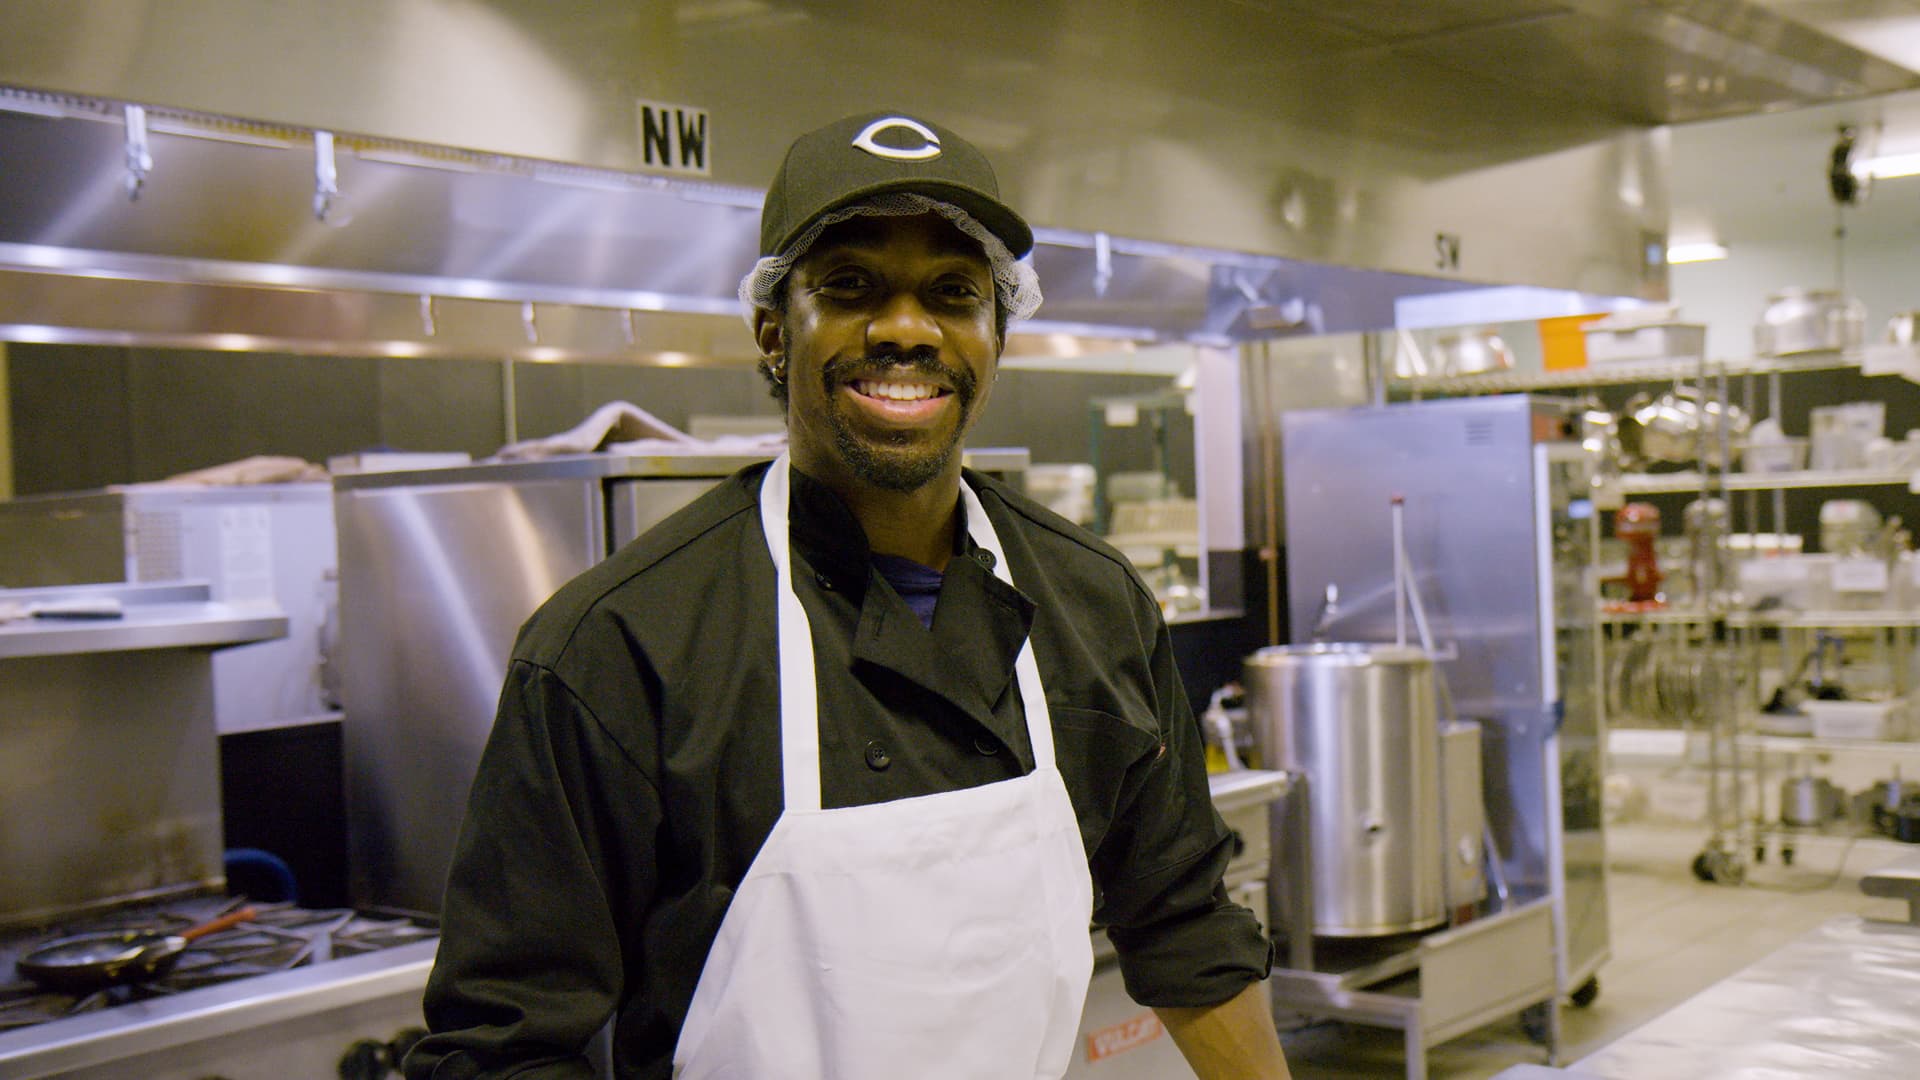 Nicholas Alston's passion project, Clutch Handheld Breakfast, is a restaurant that specializes in breakfast sandwiches.